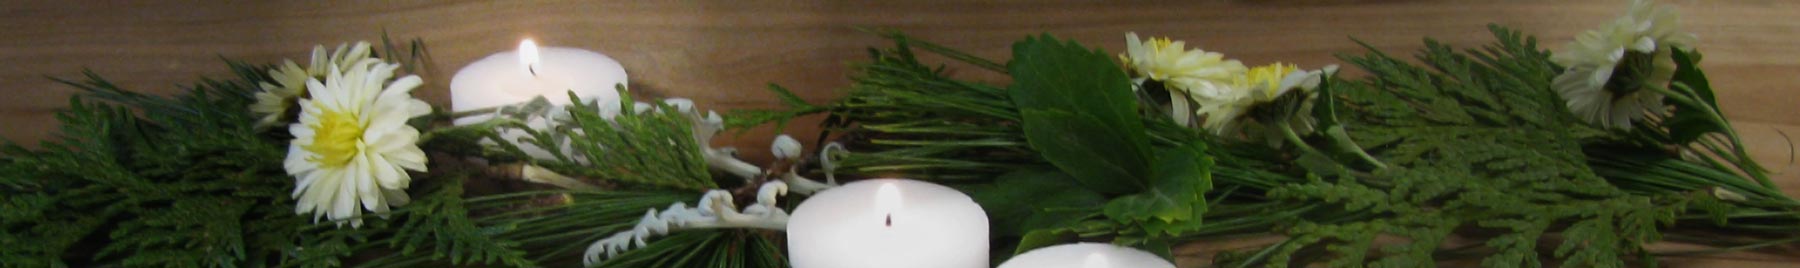 candle and flower arrangement